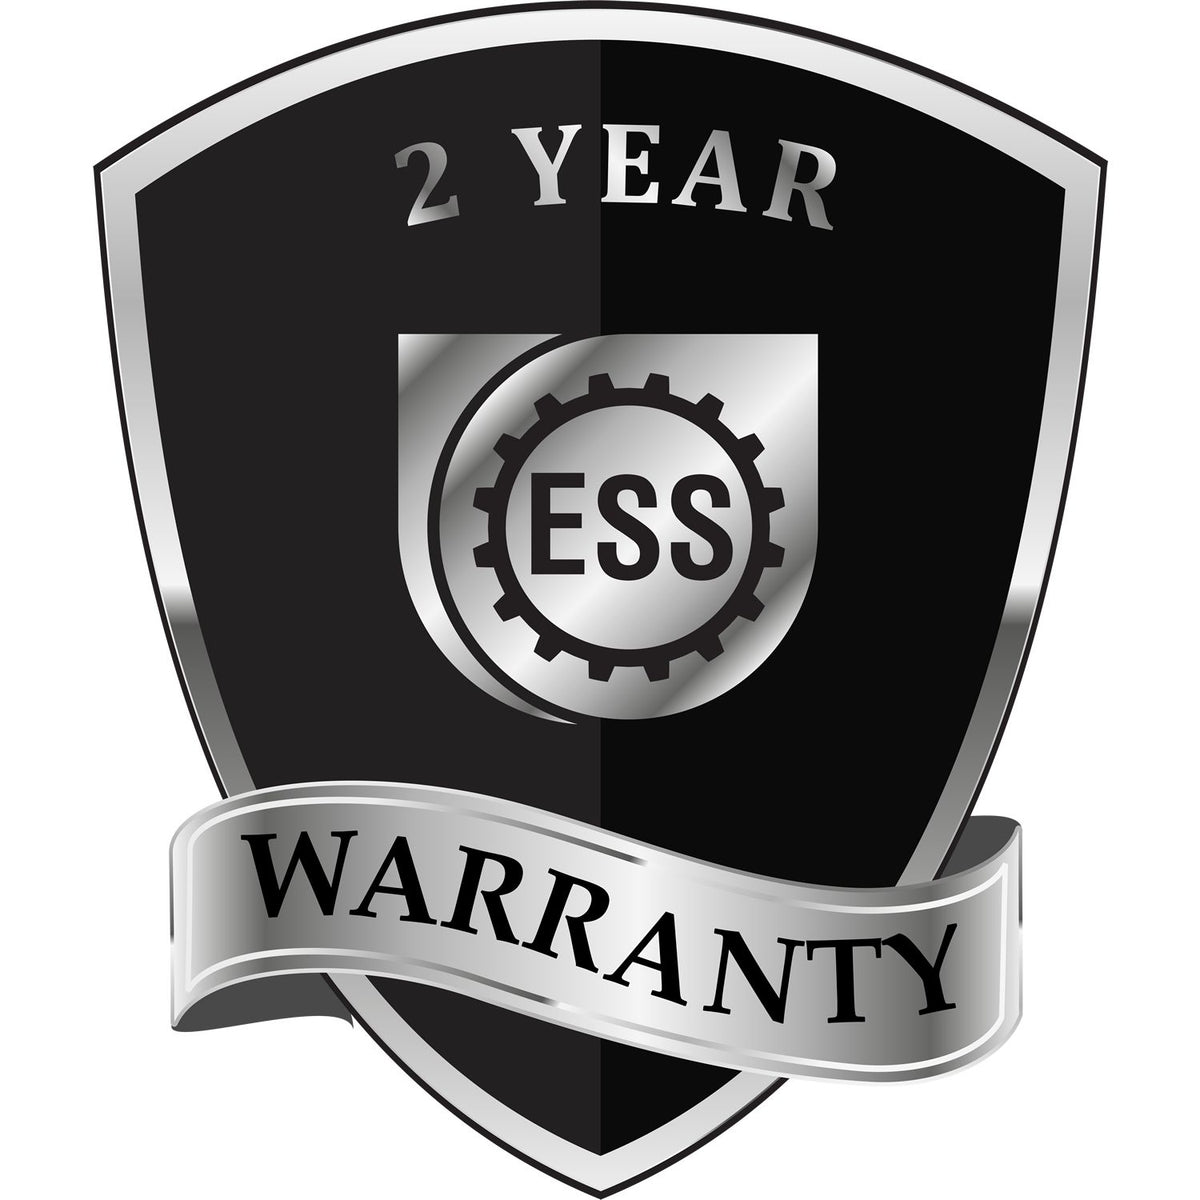 A black and silver badge or emblem showing warranty information for the Hybrid Indiana Architect Seal